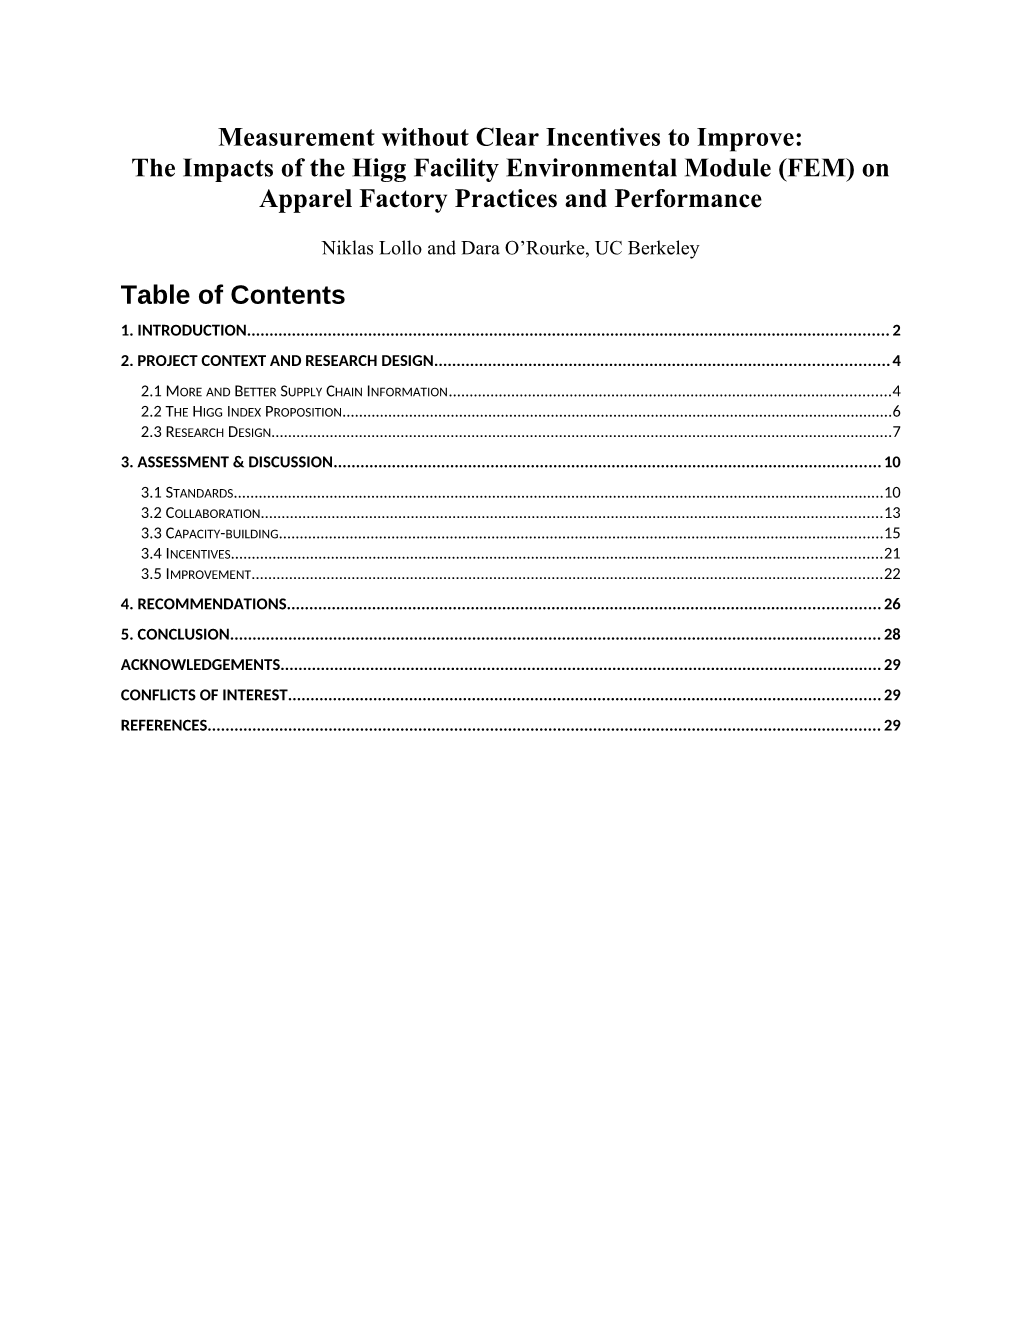 The Impacts of the Higg Facility Environmental Module (FEM) on Apparel Factory Practices and Performance